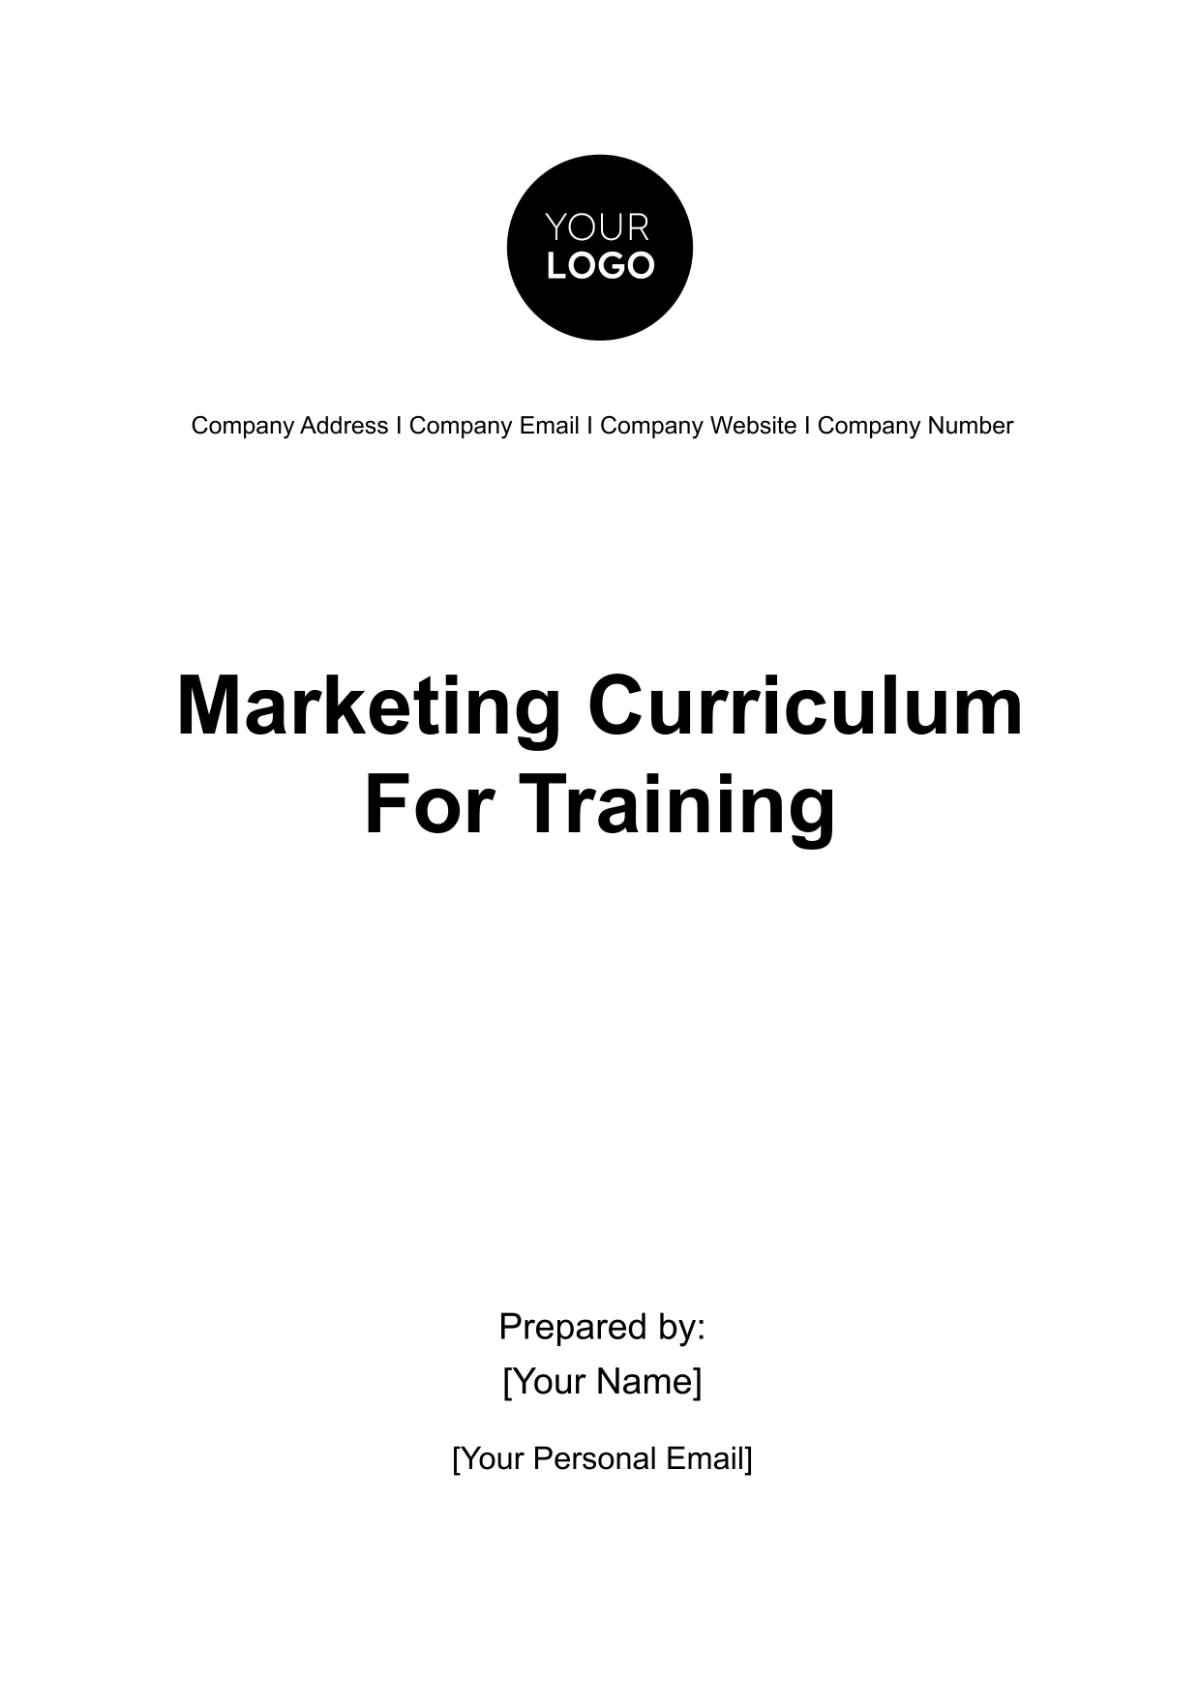 Free Marketing Curriculum for Training Template